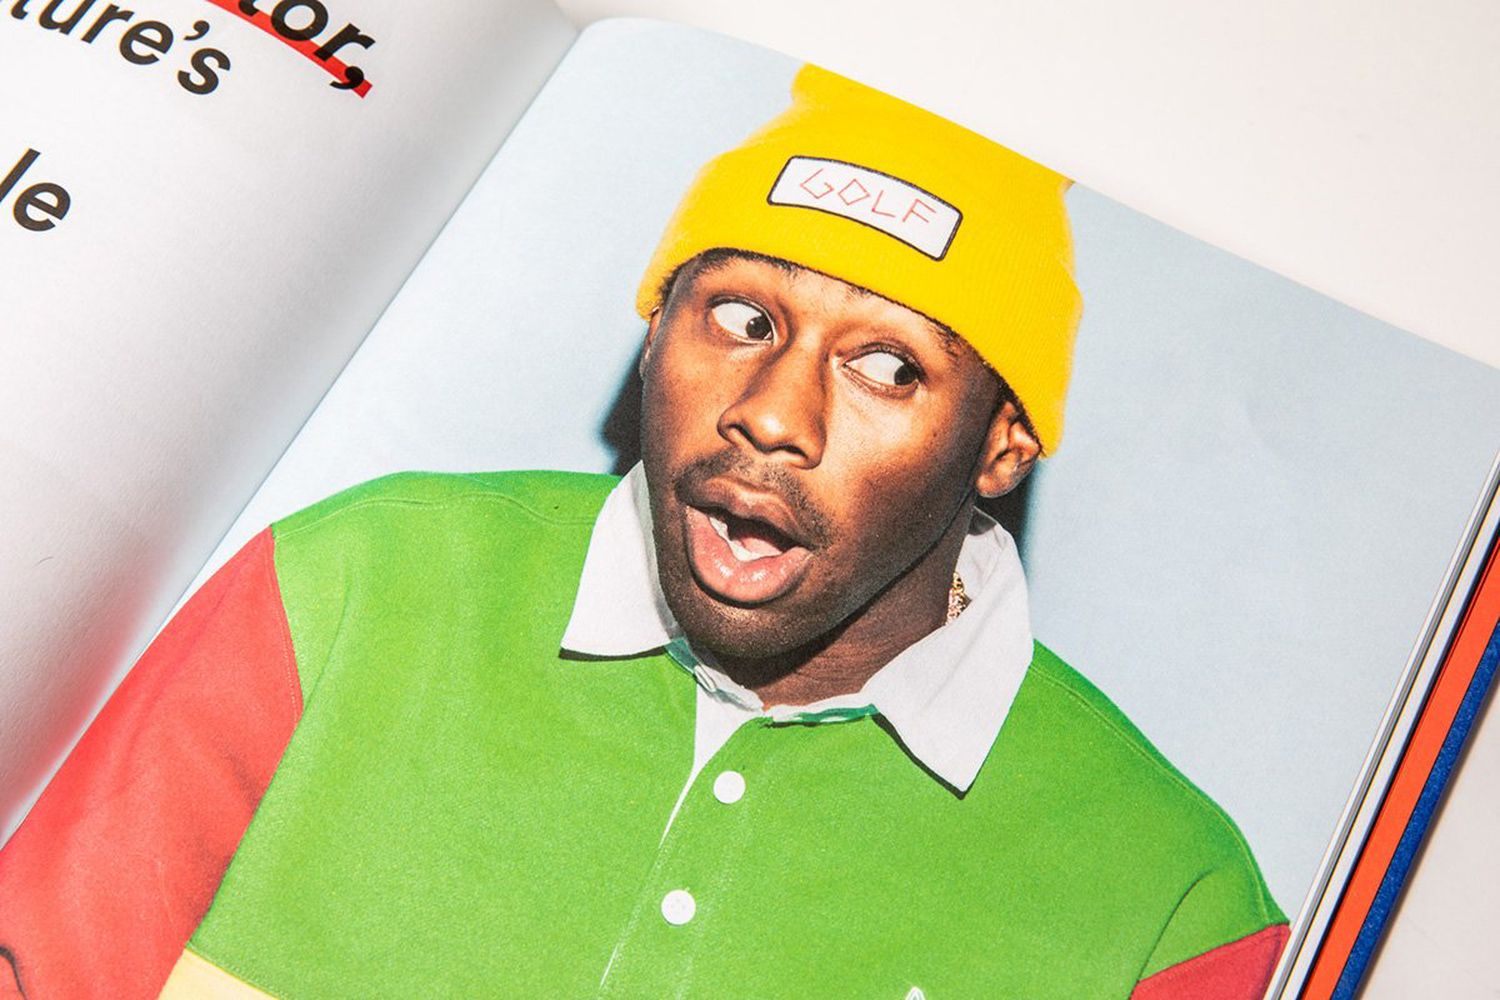 The Incomplete Highsnobiety Guide To Street Fashion & Culture